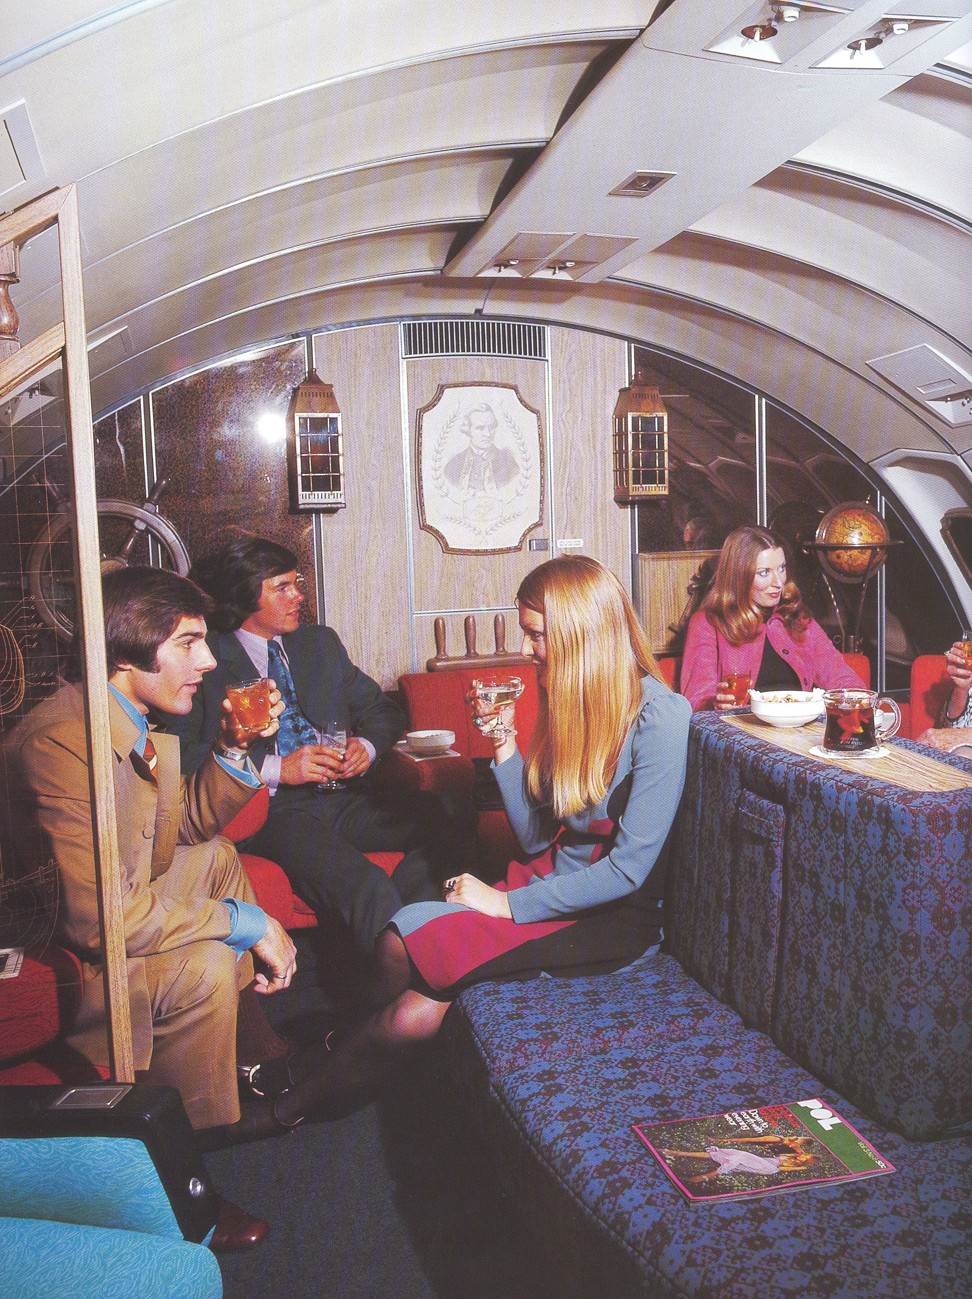 The first of Qantas’ Boeing 747 aircraft featured a nautical-themed Captain Cook Lounge.